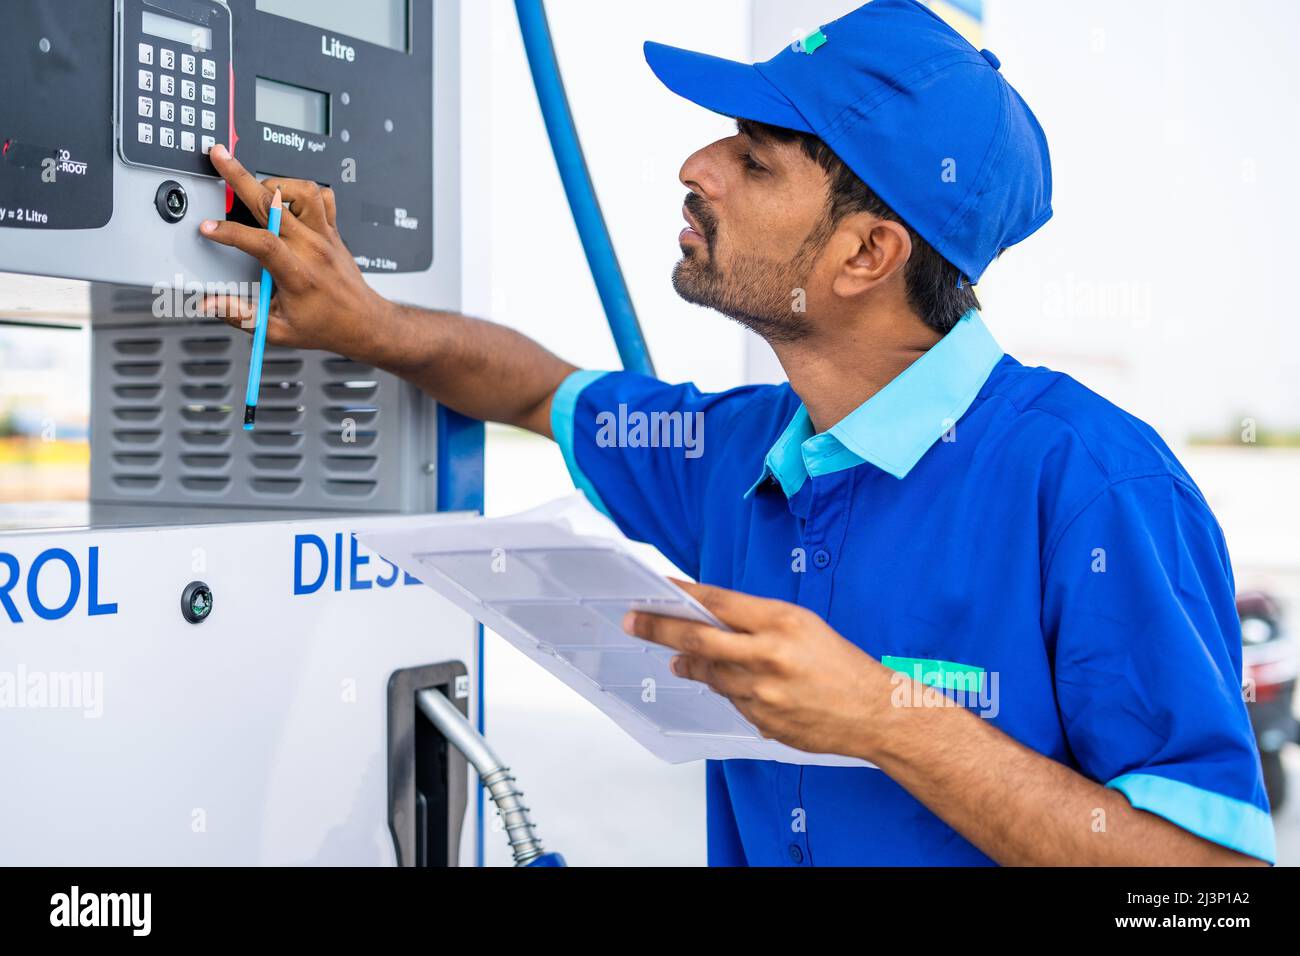 Petrol pump worker noting or writing fule meter at petroleum station - concept of employment, jobs and gas filling station. Stock Photo